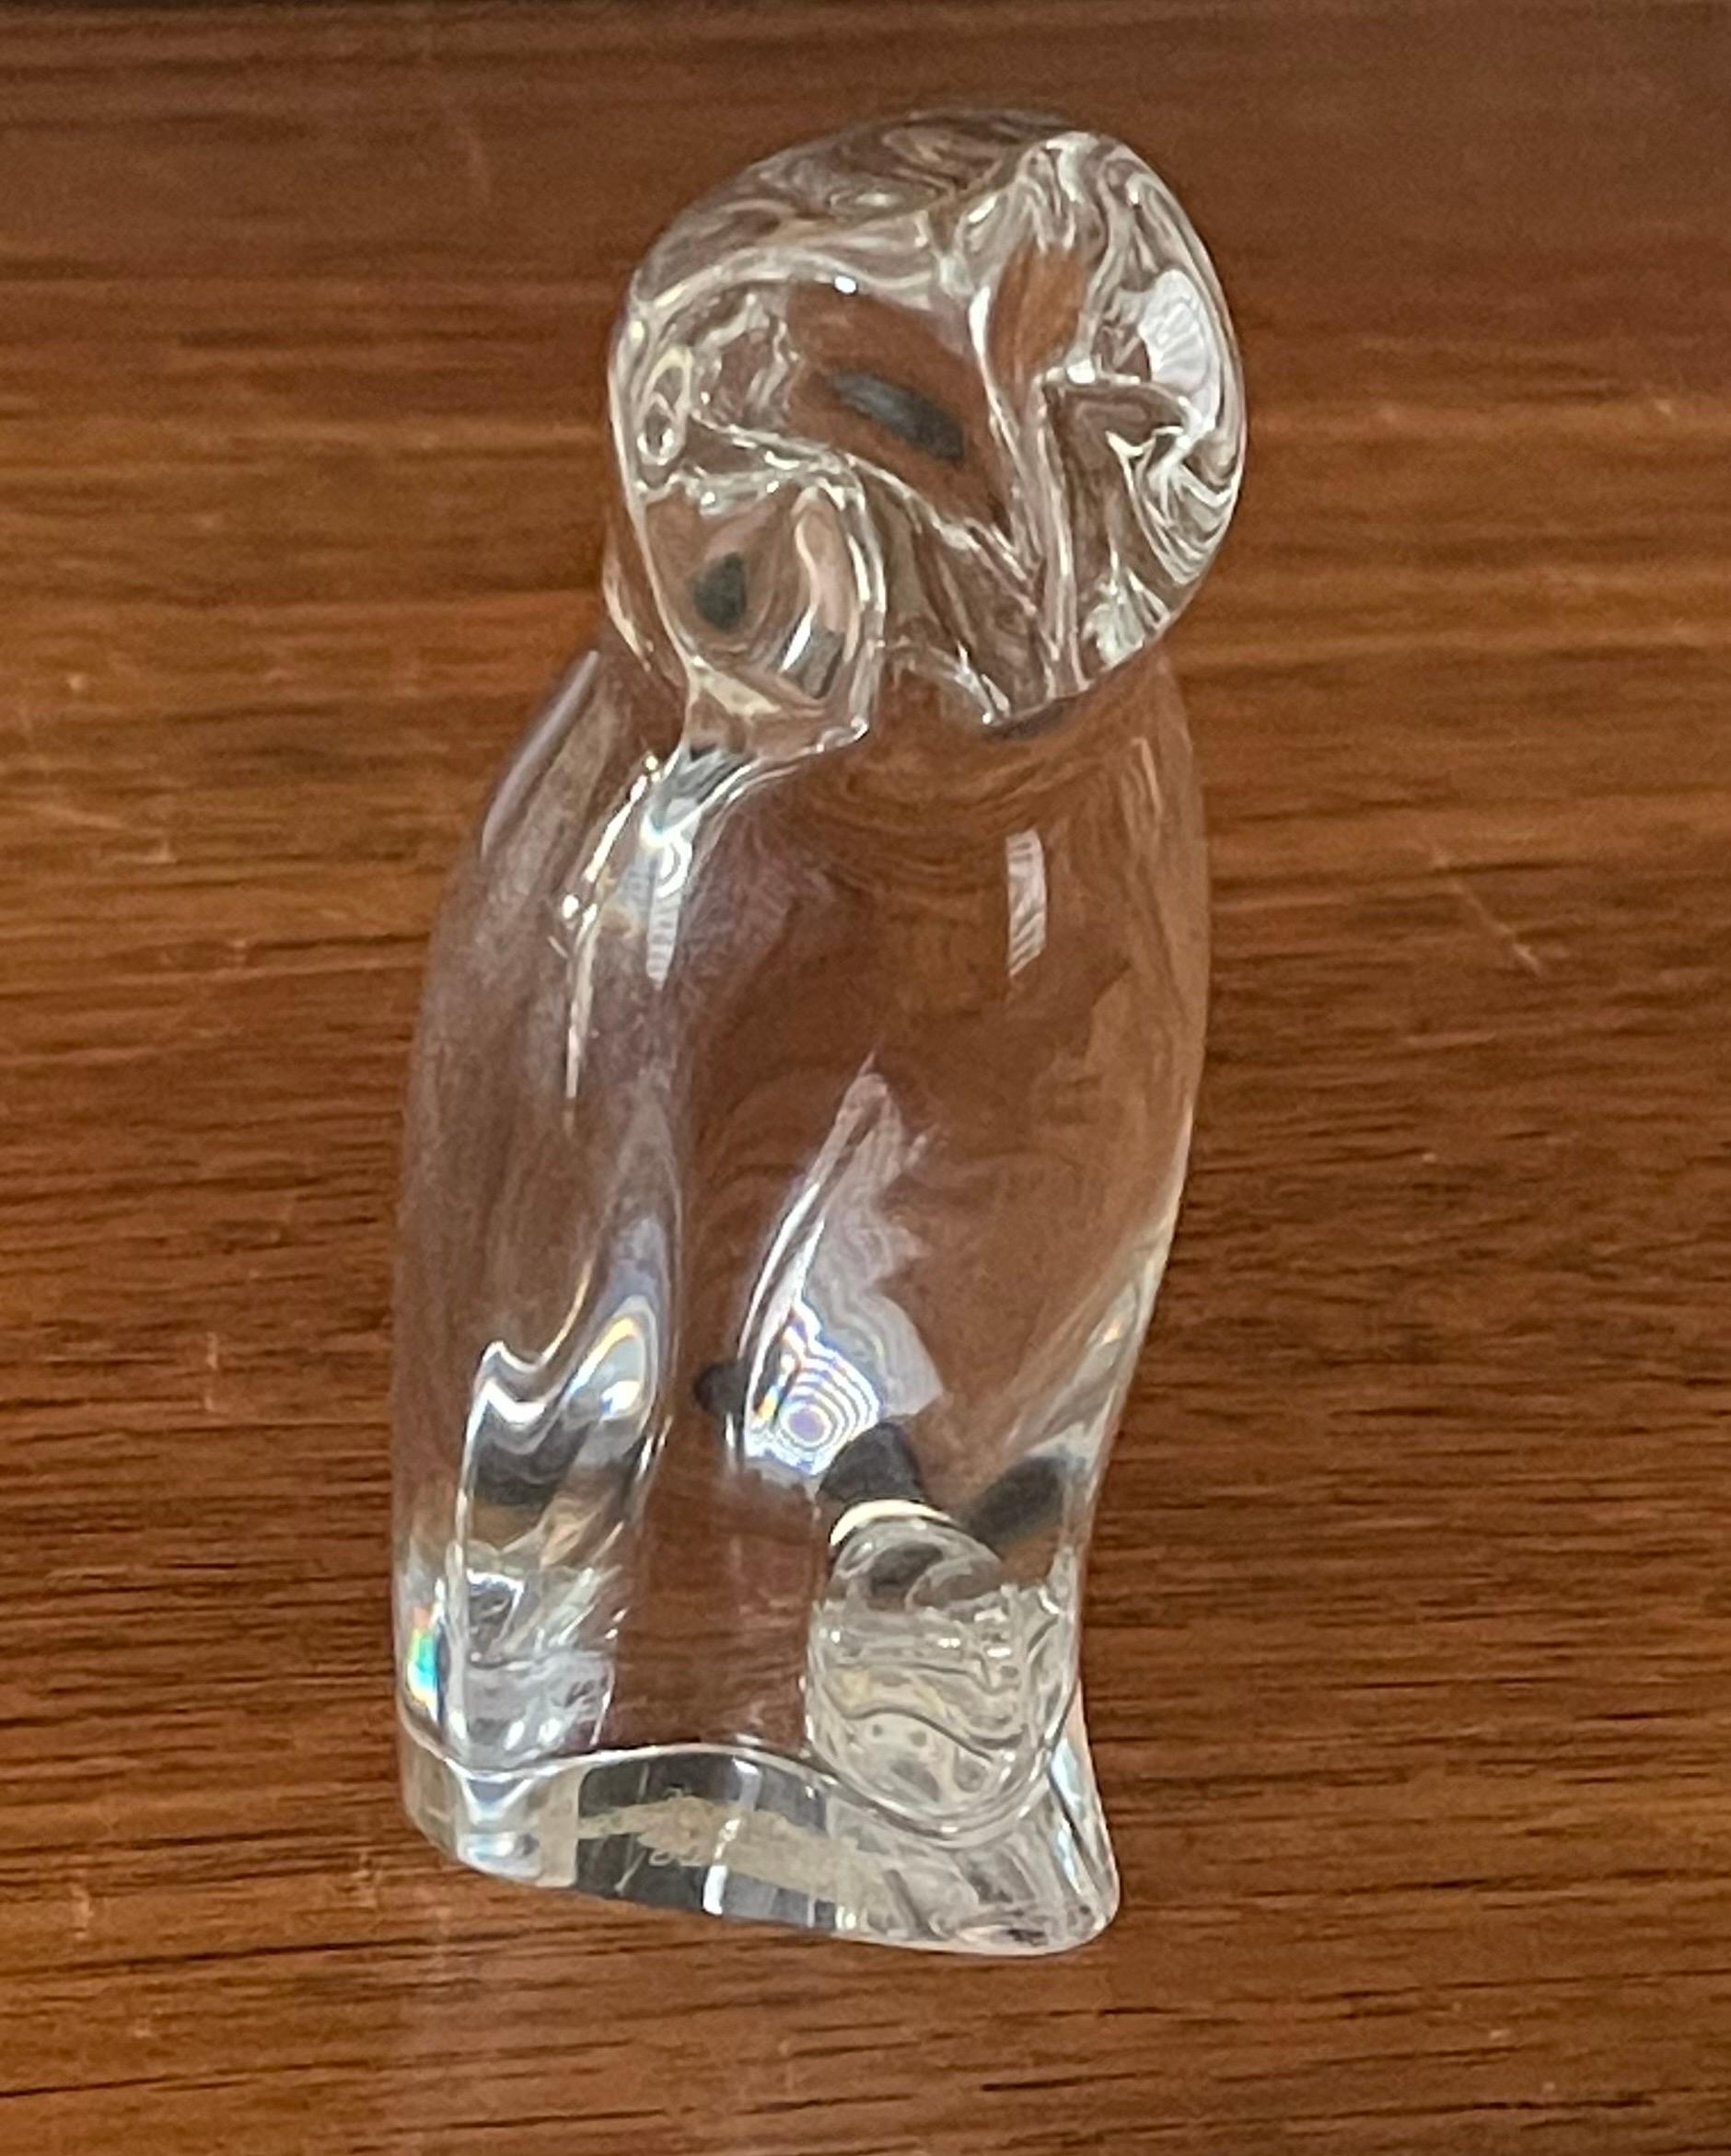 Stylized Crystal Owl Sculpture / Paperweight by Baccarat 1